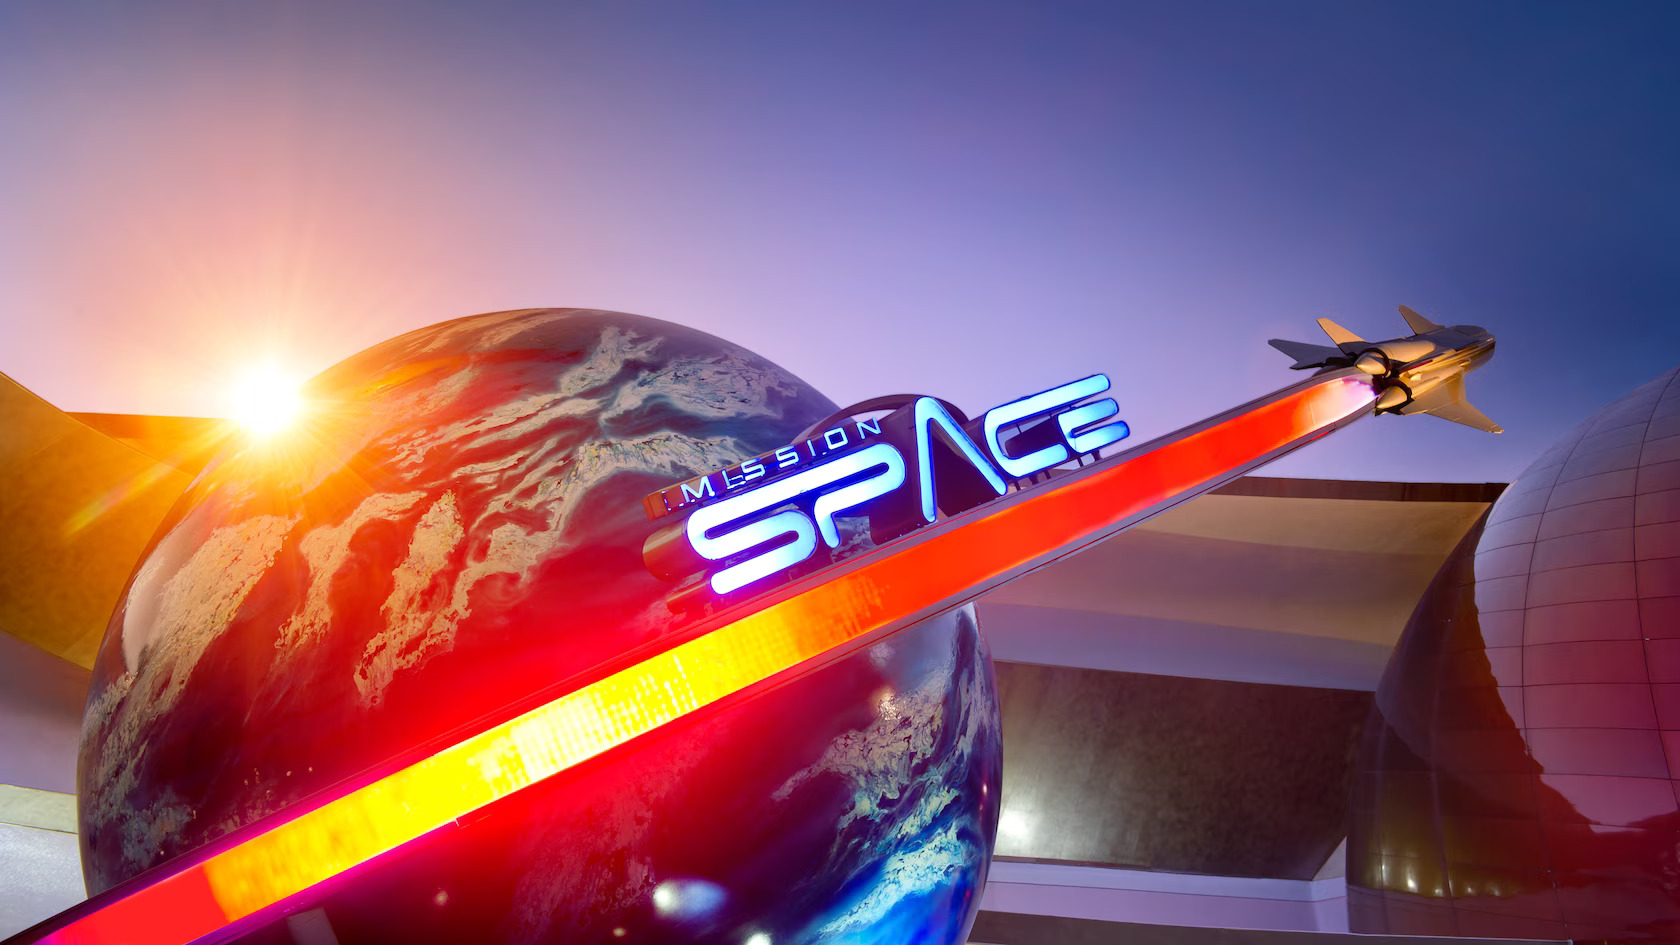 epcot mission space